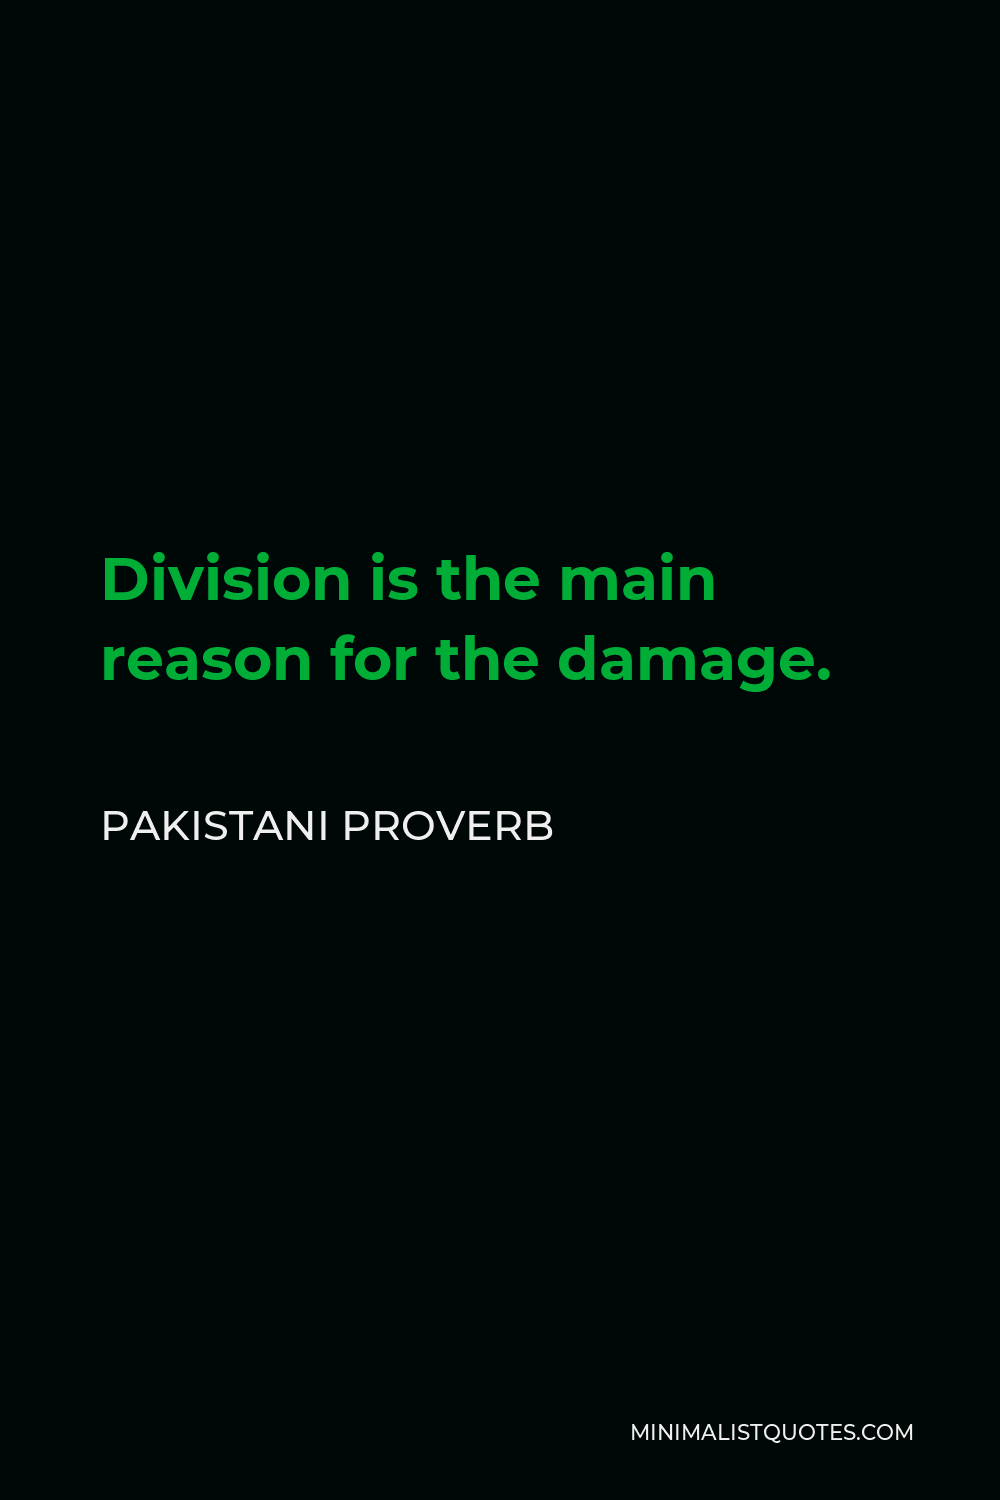 Pakistani Proverb Quote - Division is the main reason for the damage.